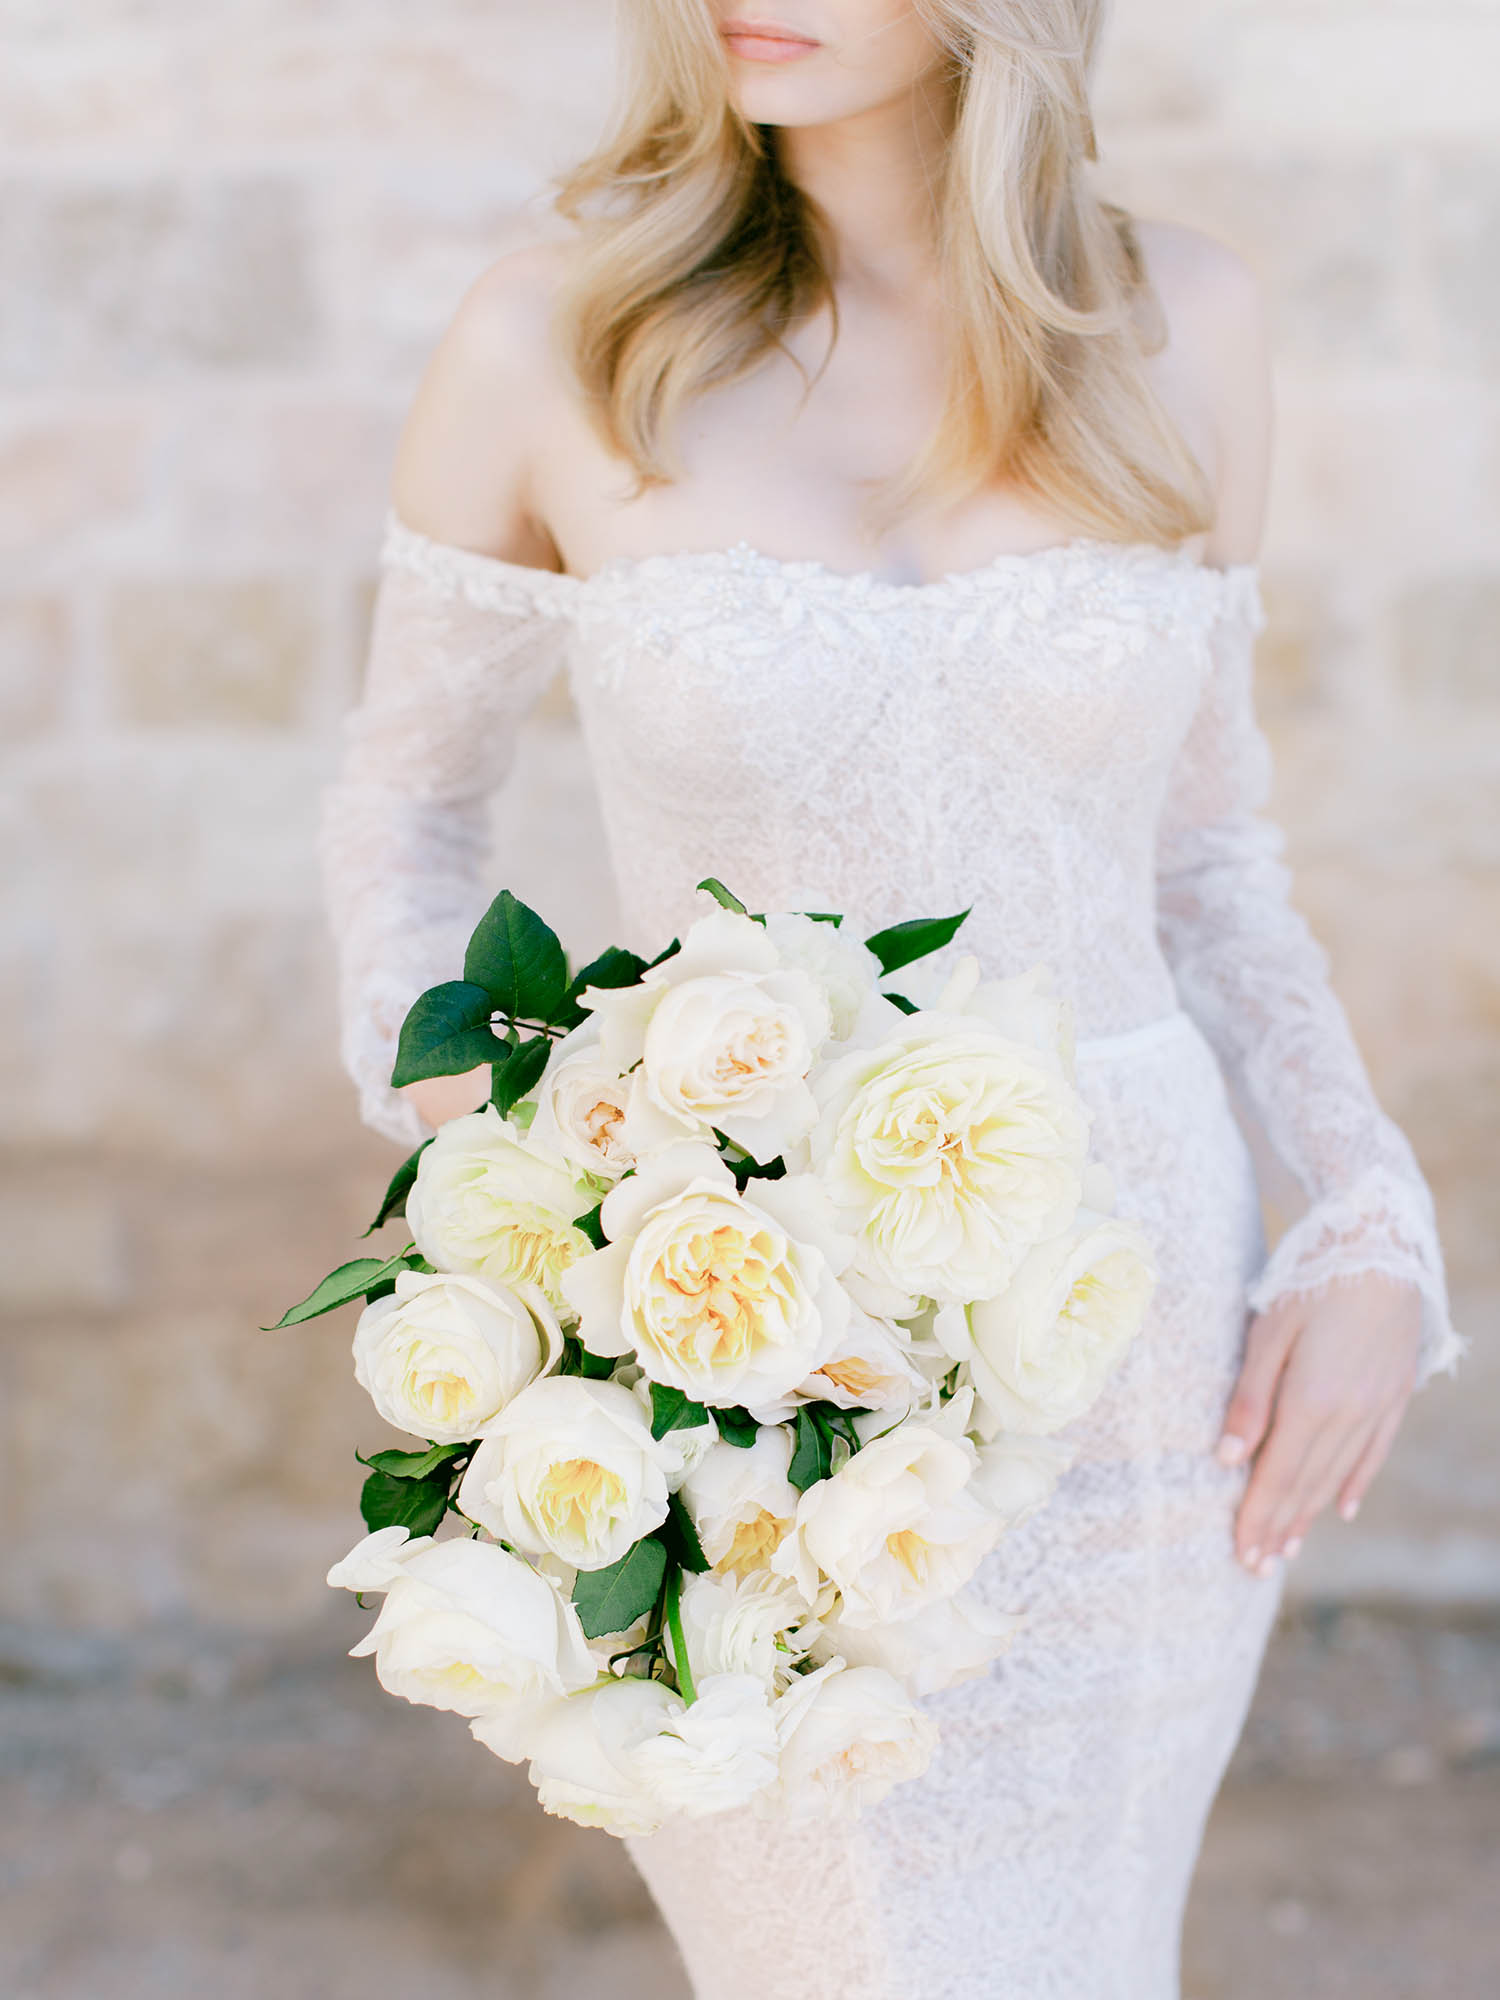 Bride Holding Wedding Bouquet with Roses